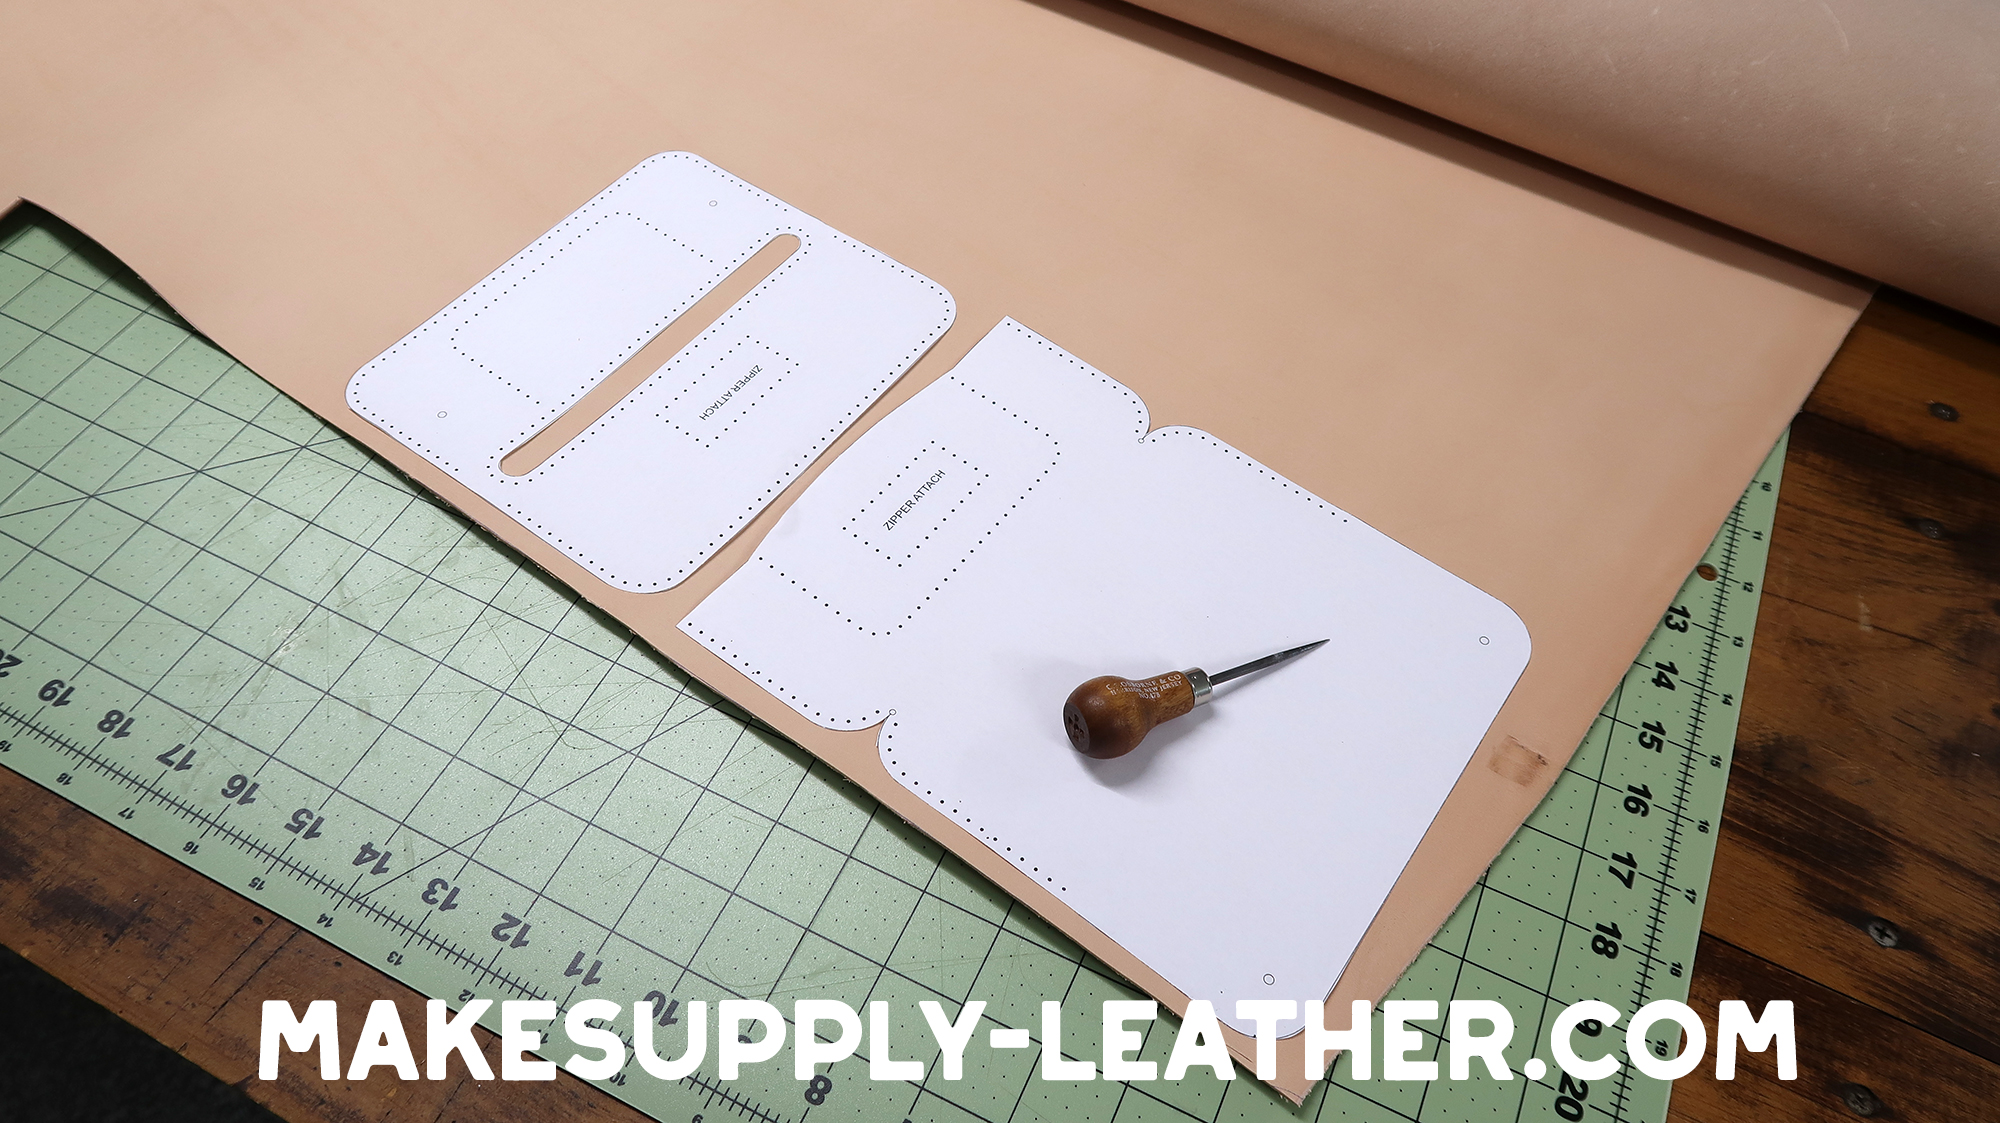 Templates - Page 2 of 6 - MAKESUPPLY